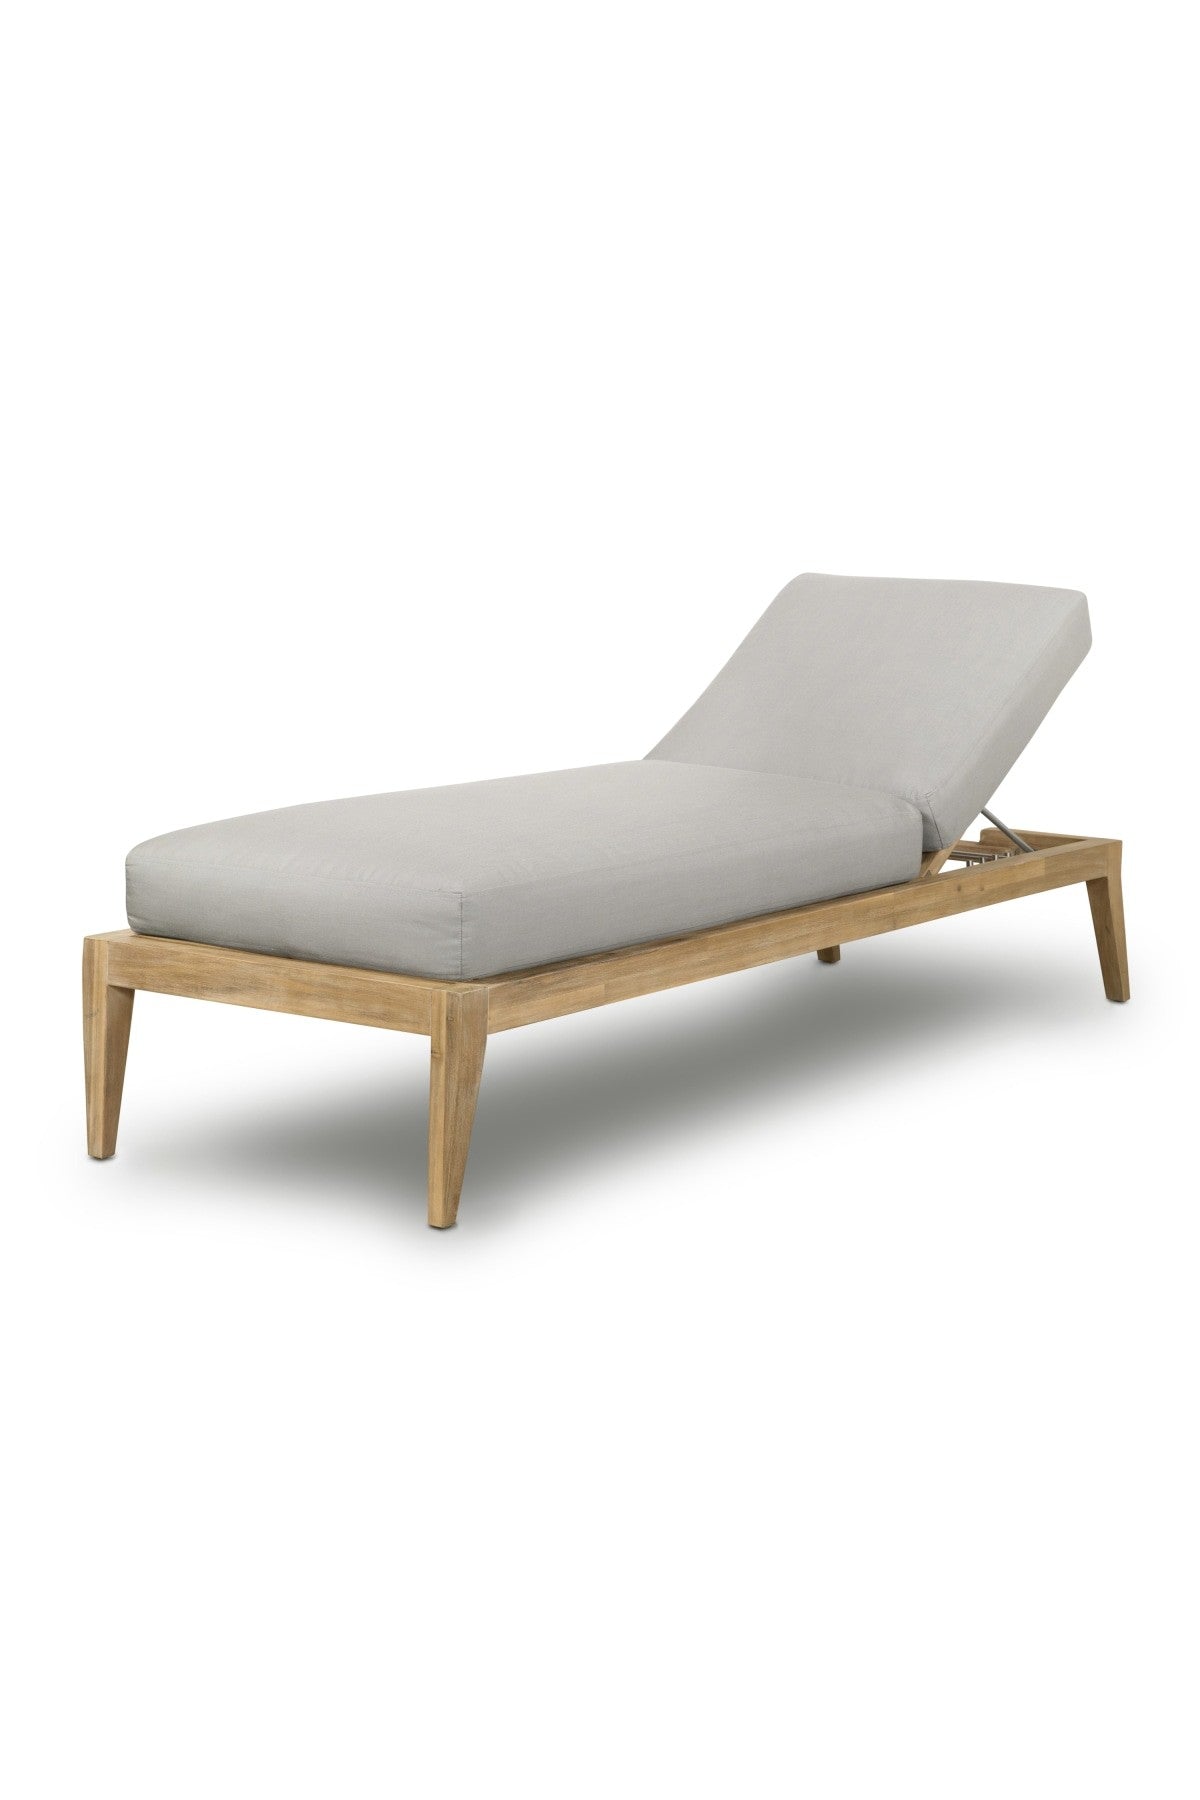 Baum Outdoor Chaise Lounge